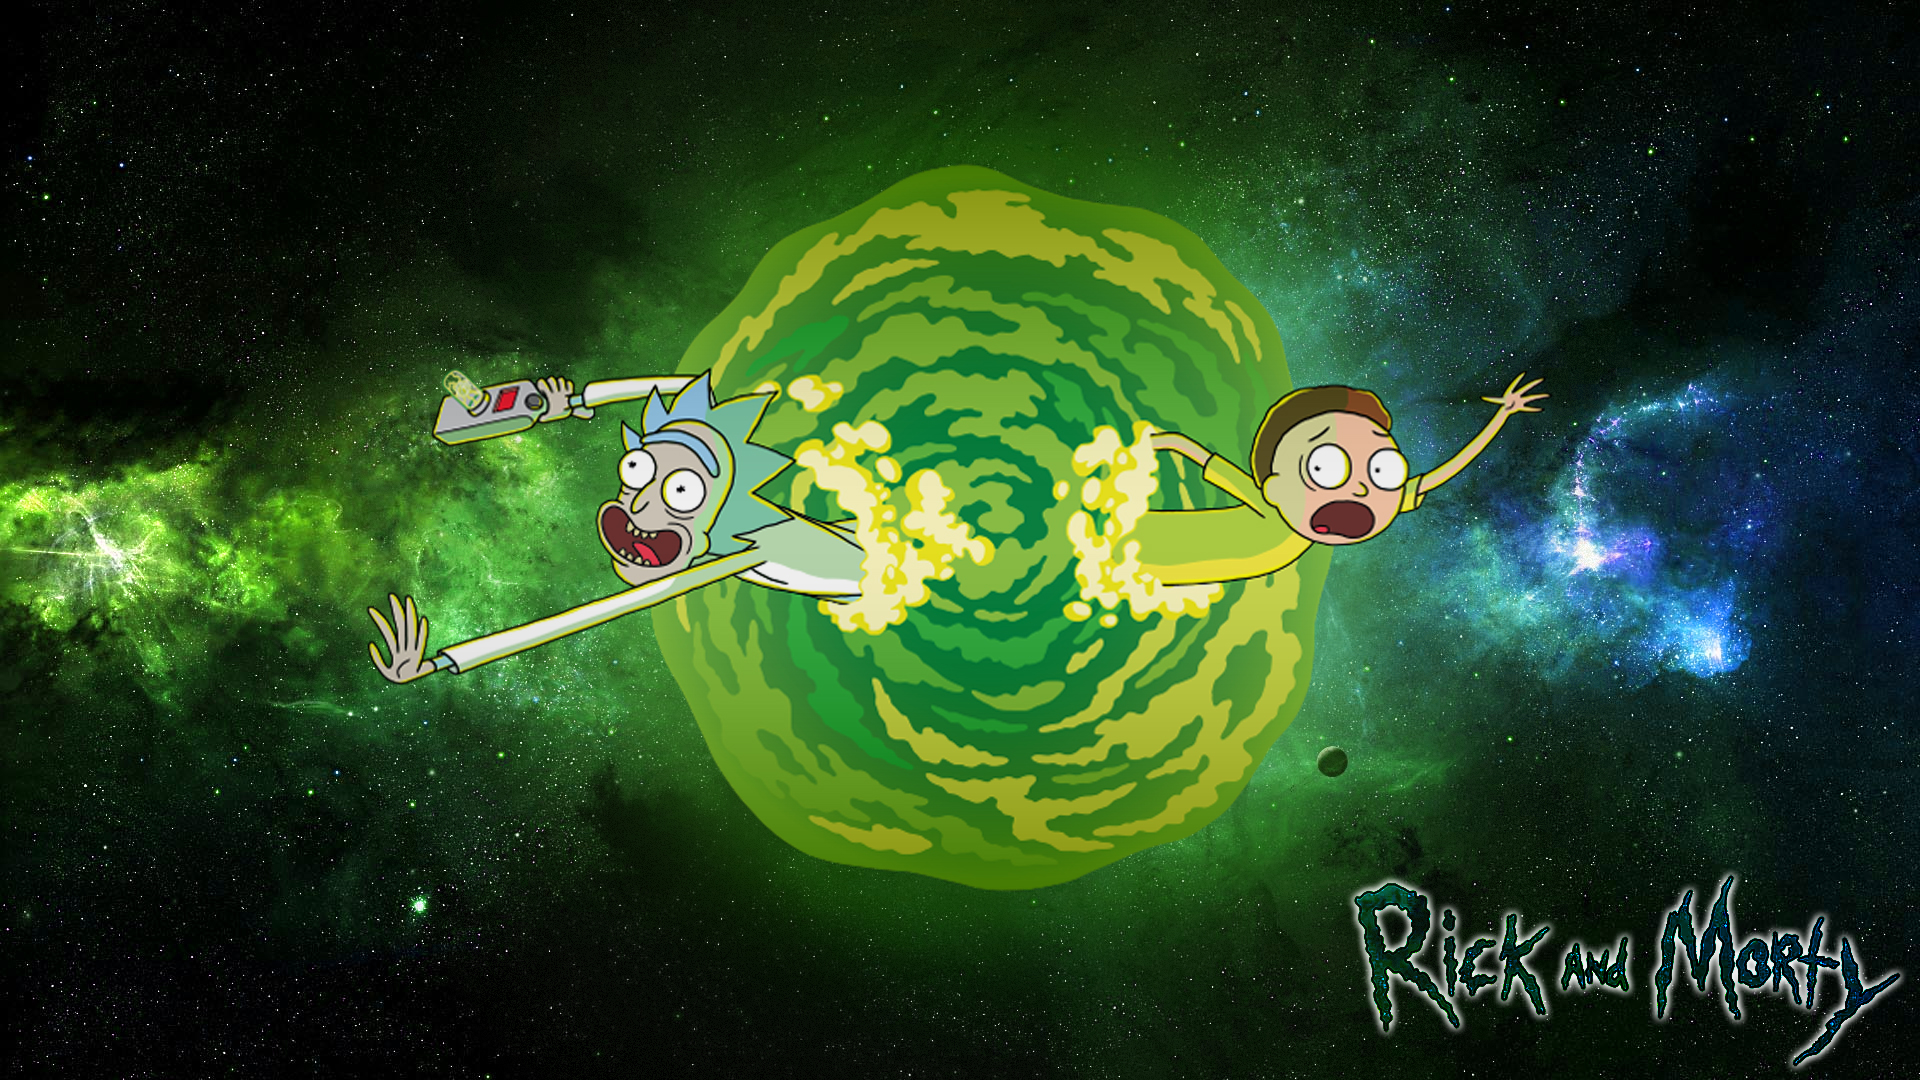 Rick and Morty Theme for Windows 10